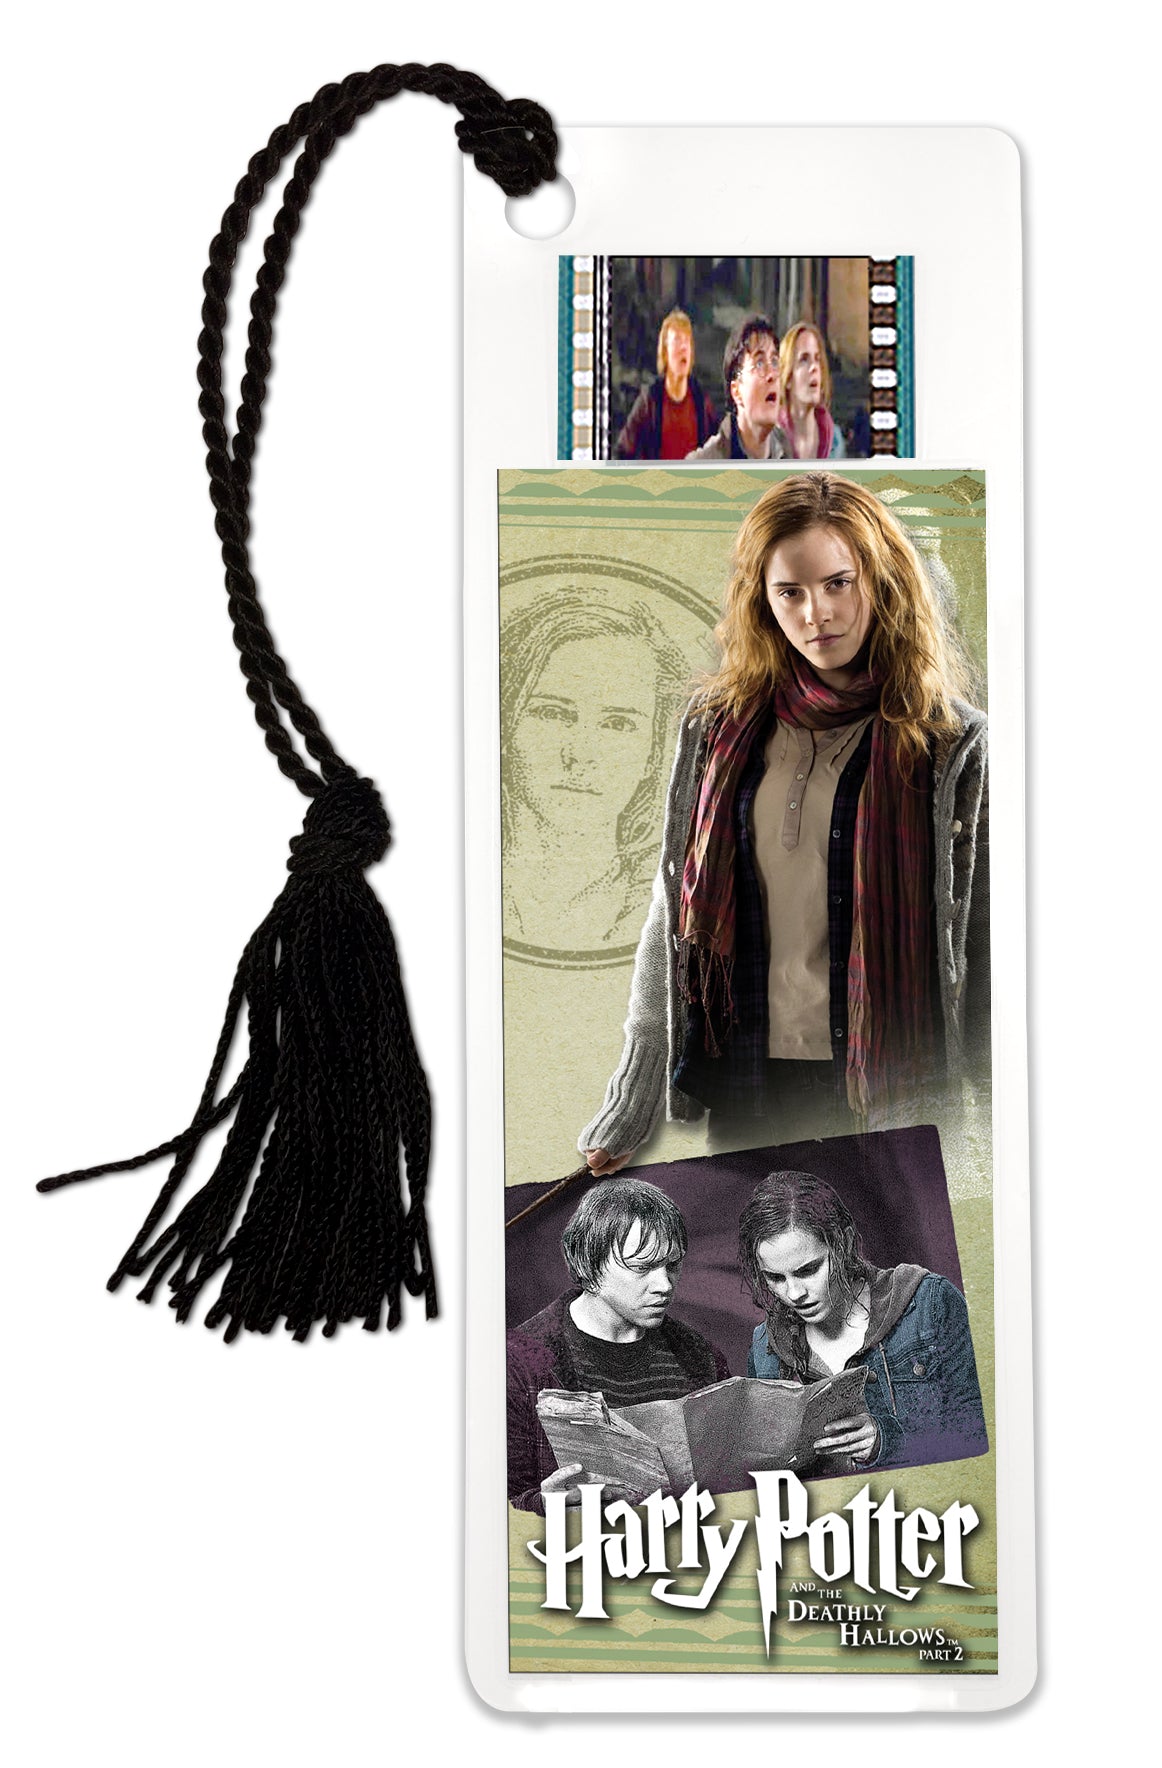 Harry Potter and the Deathly Hallows: Part 2 (Hermione Granger) FilmCells™ Bookmark USBM605